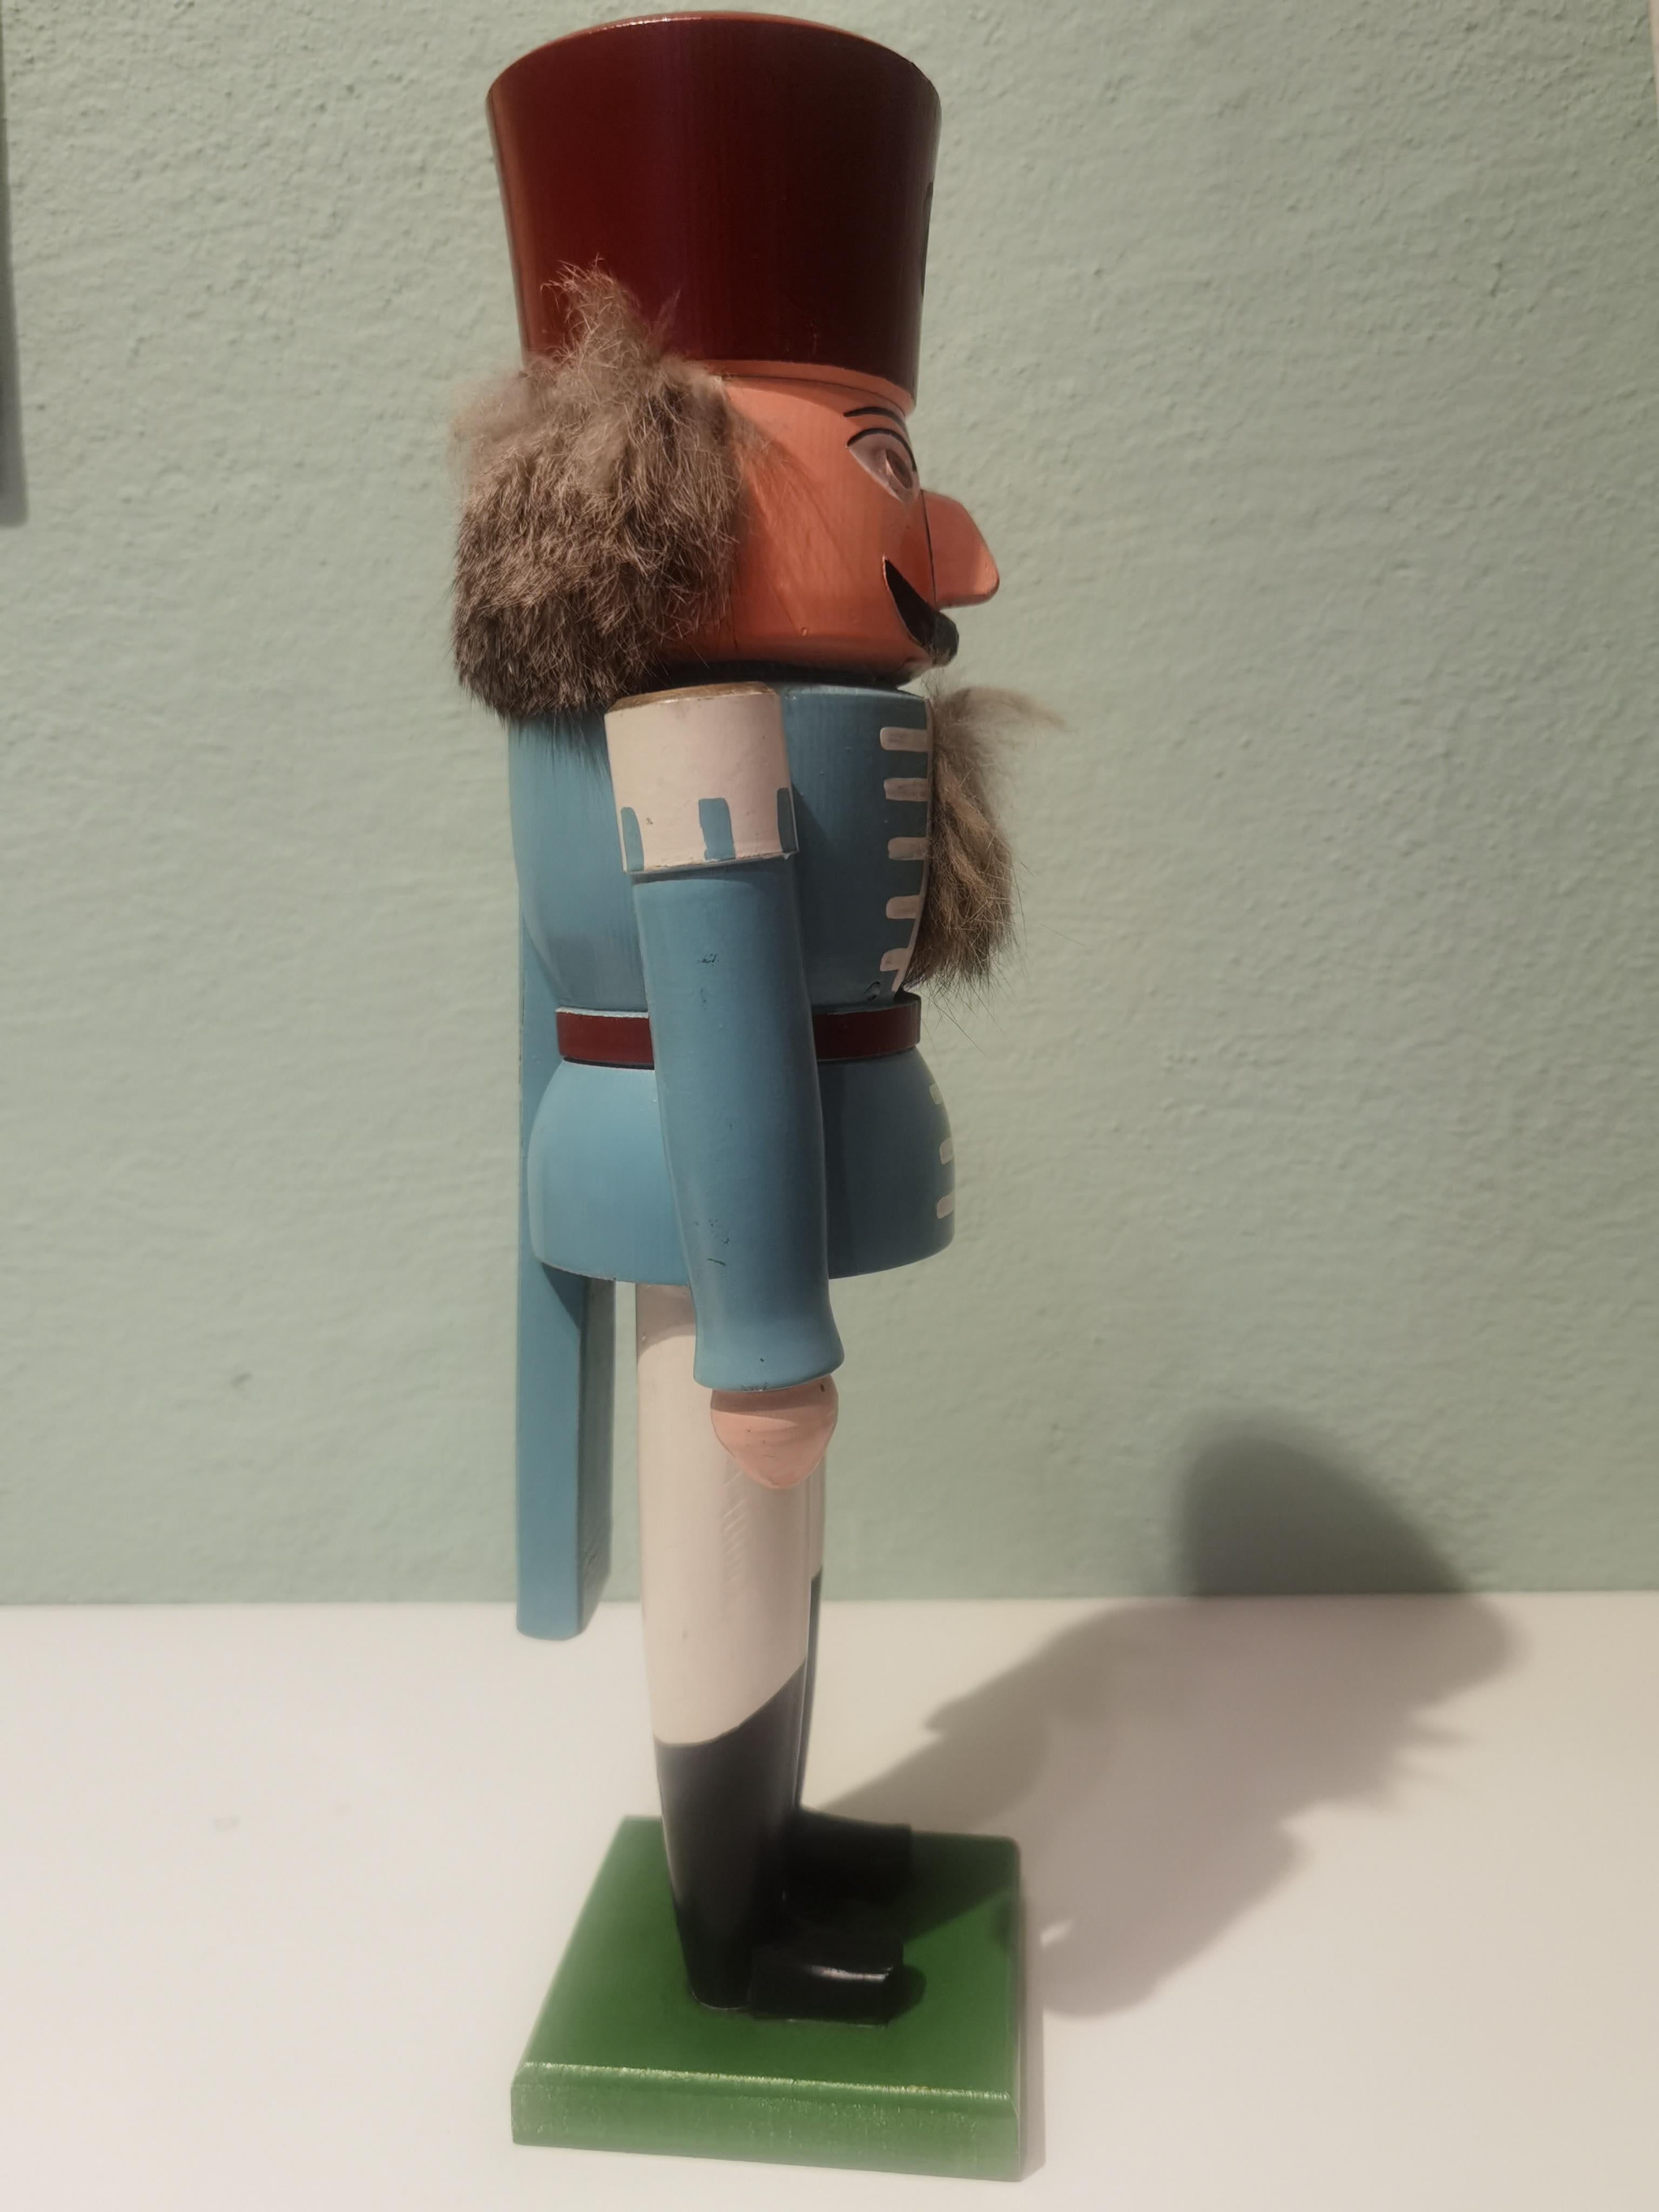 Large vintage wooden nutcracker figure from the Erzgebirge. The region Erzgebirge formerly Eastern Germany is famous for this special kind of nutcrackers, where intricate carving has been their home. Completely hand-painted in light blue and white